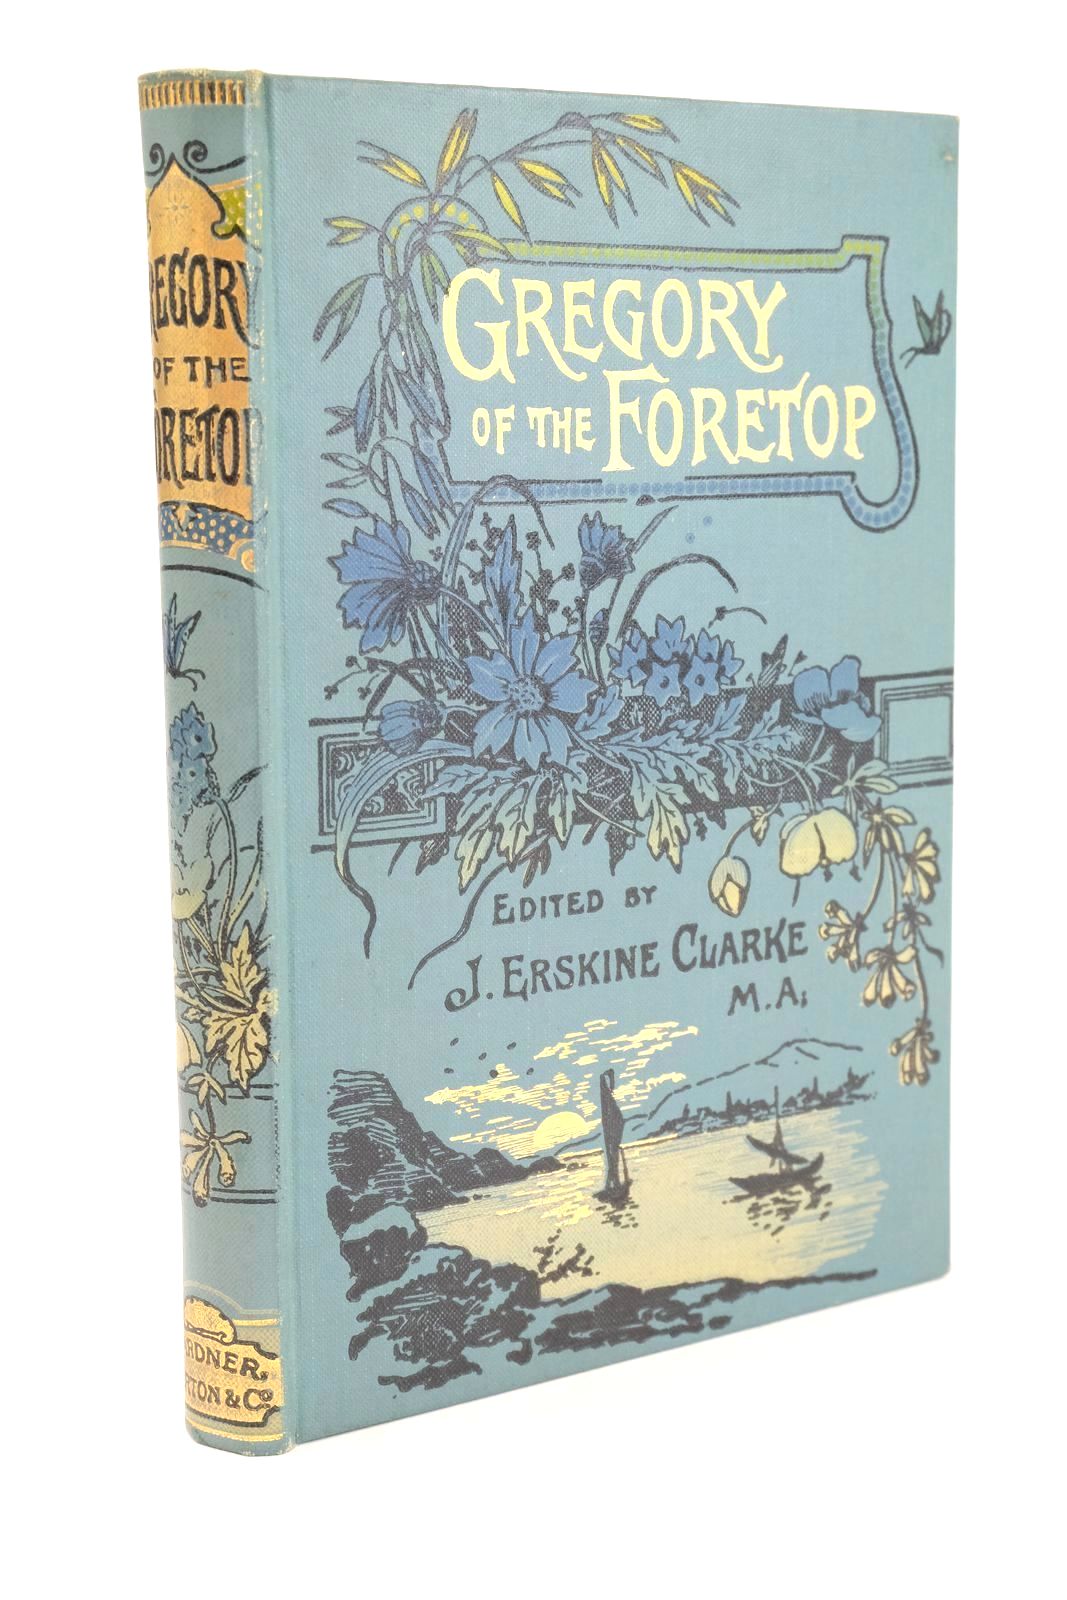 Photo of GREGORY OF THE FORETOP AND OTHER TALES- Stock Number: 1325344